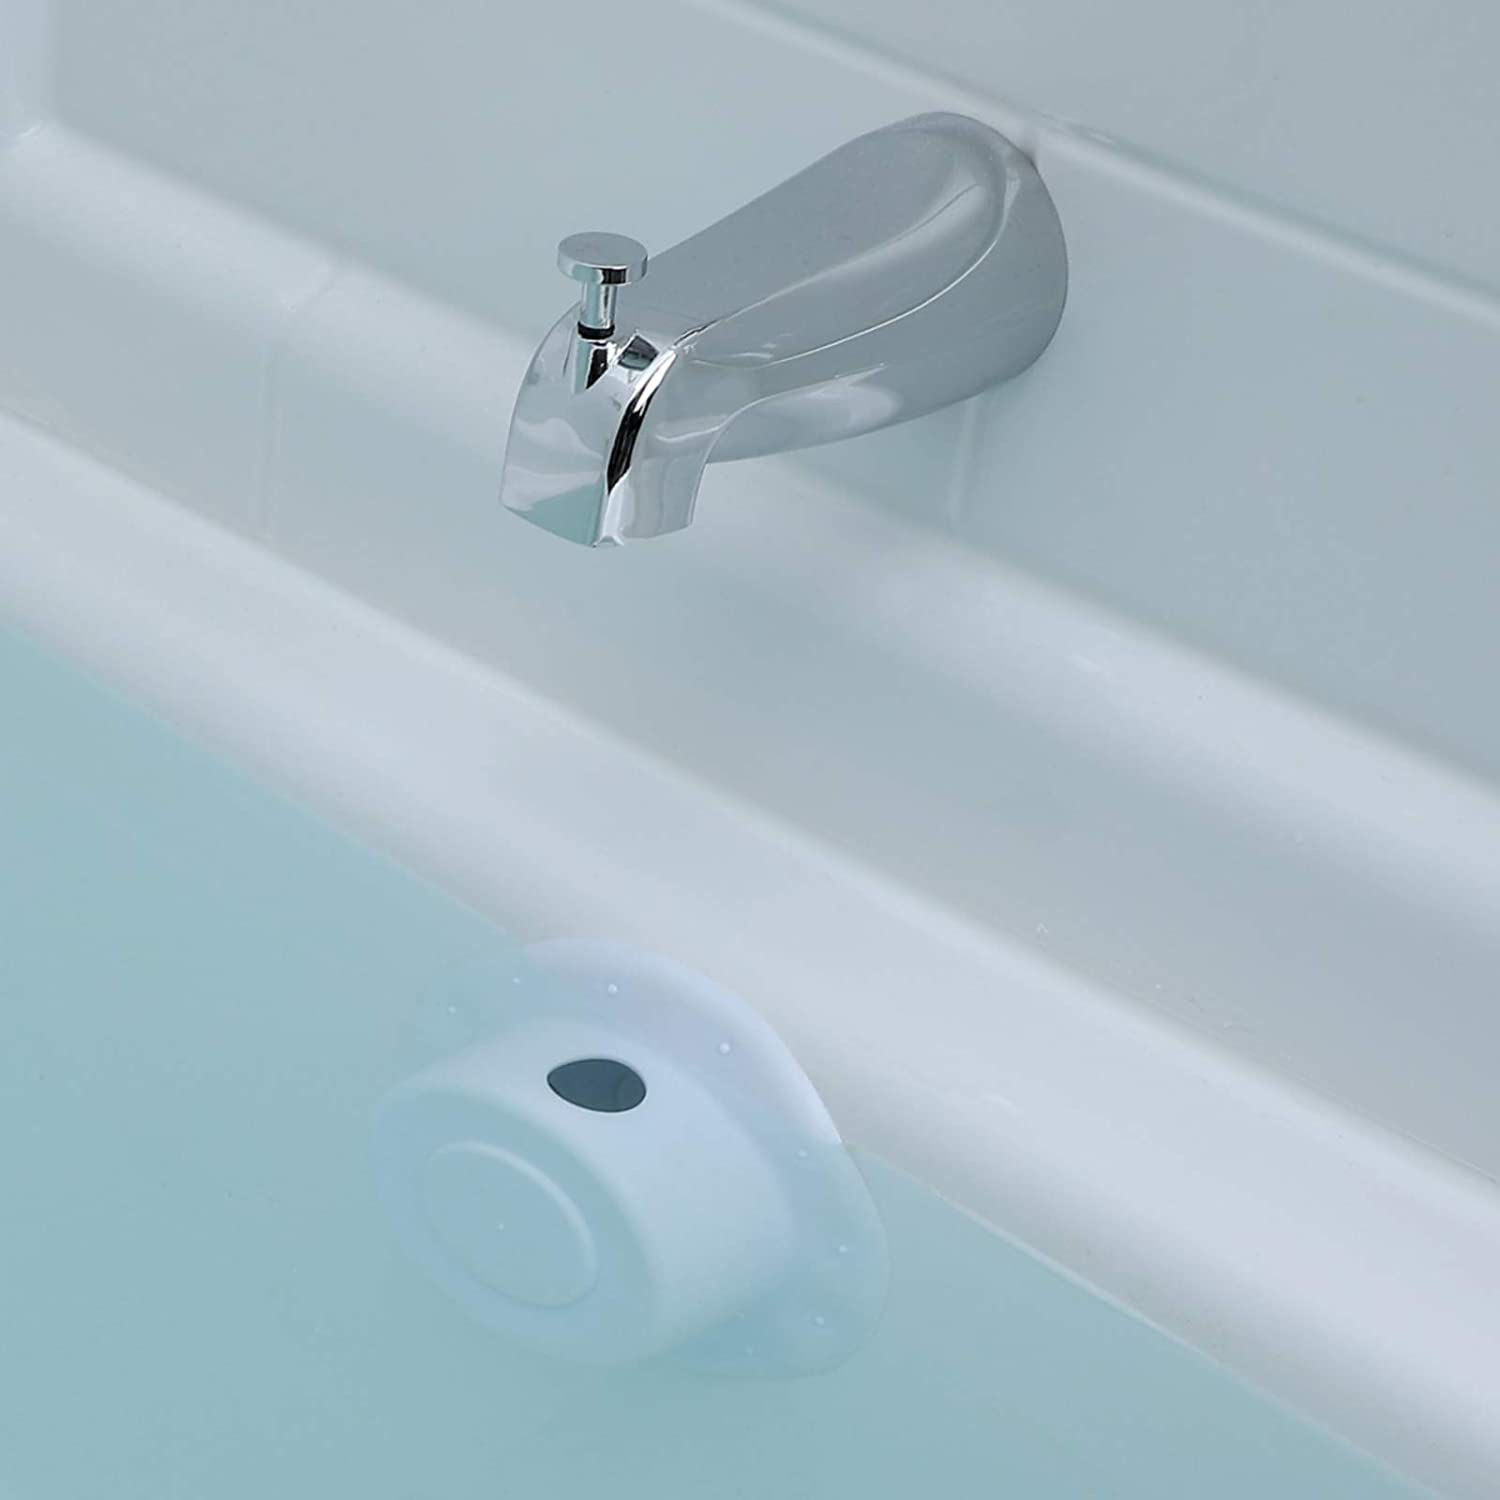 Gorilla Grip Bathtub Overflow Drain Cover, Adds Inches of Water